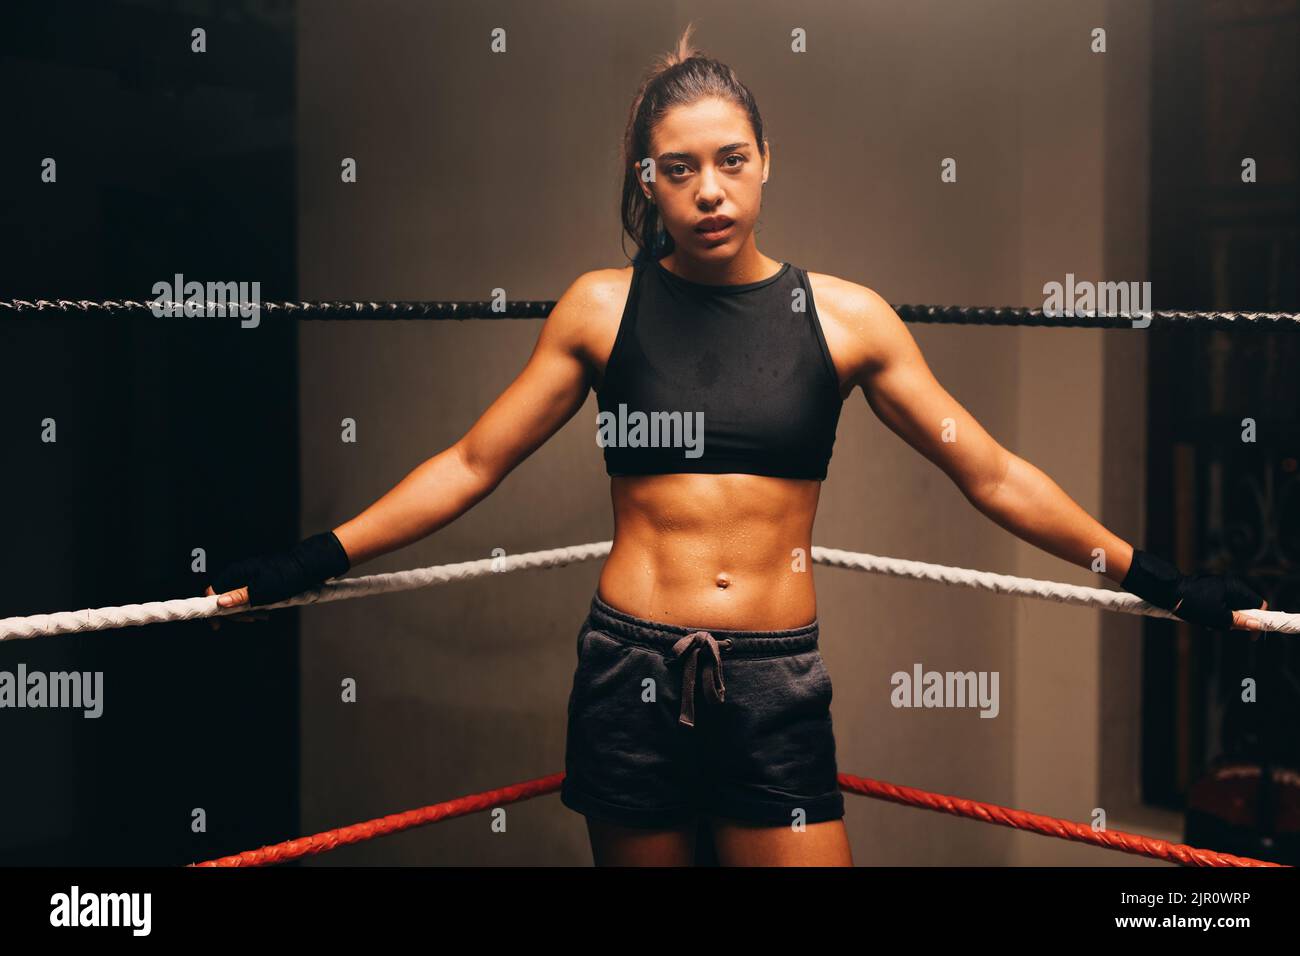 https://c8.alamy.com/comp/2JR0WRP/fit-young-woman-looking-at-the-camera-while-standing-in-one-corner-of-a-boxing-ring-confident-female-boxer-training-in-a-boxing-gym-2JR0WRP.jpg